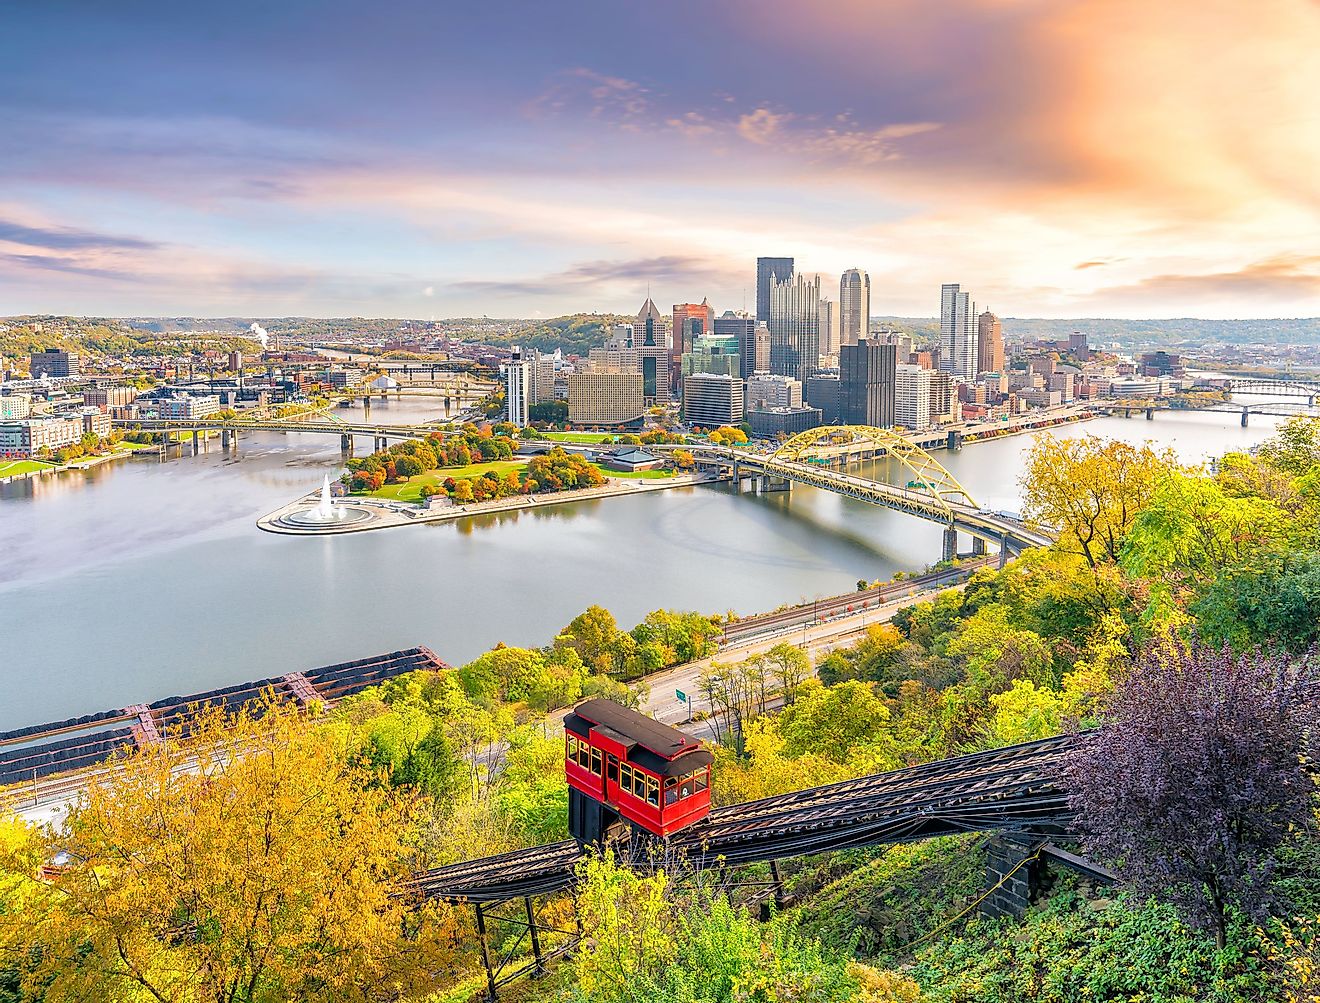 Downtown skyline of Pittsburgh, Pennsylvania at sunset. Image credit f11photo via shutterstock